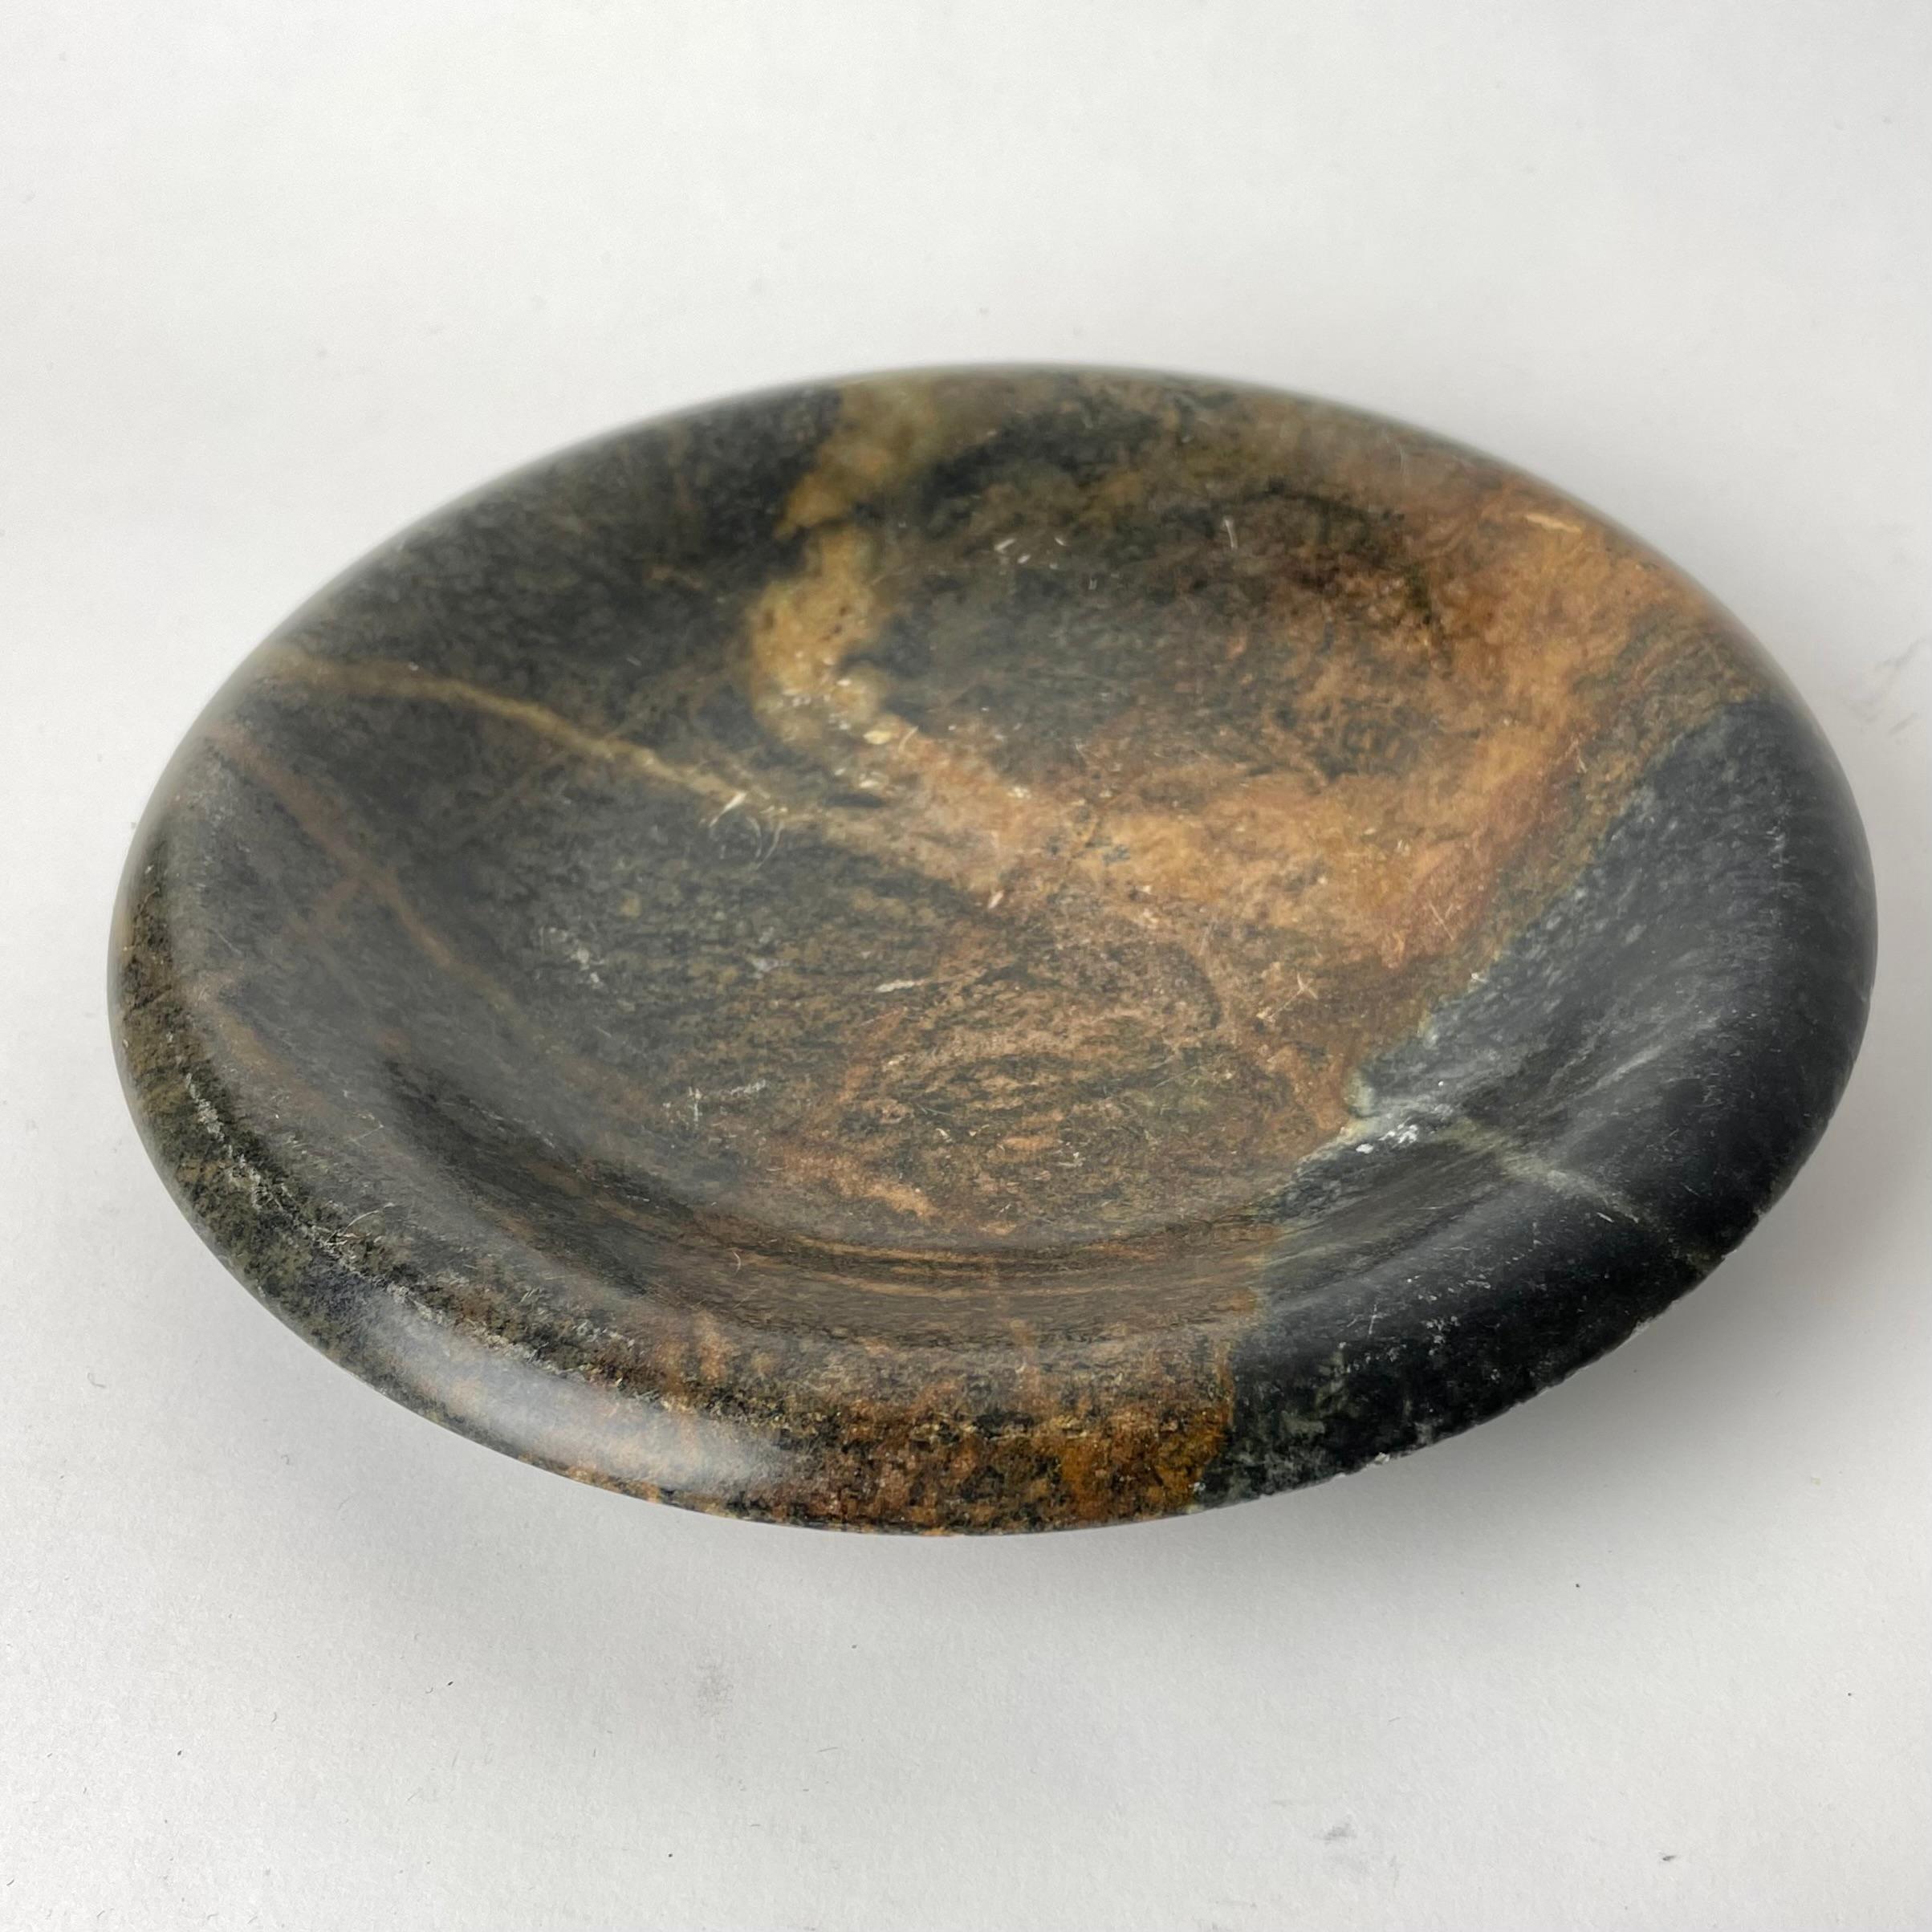 Charming Marble Bowl from early 19th Century in soft colours. Beautiful patina after 200 years of use. Small damage to the edge (see picture) but nothing that disturbs in my opinion.

Wear consistent with age and use 